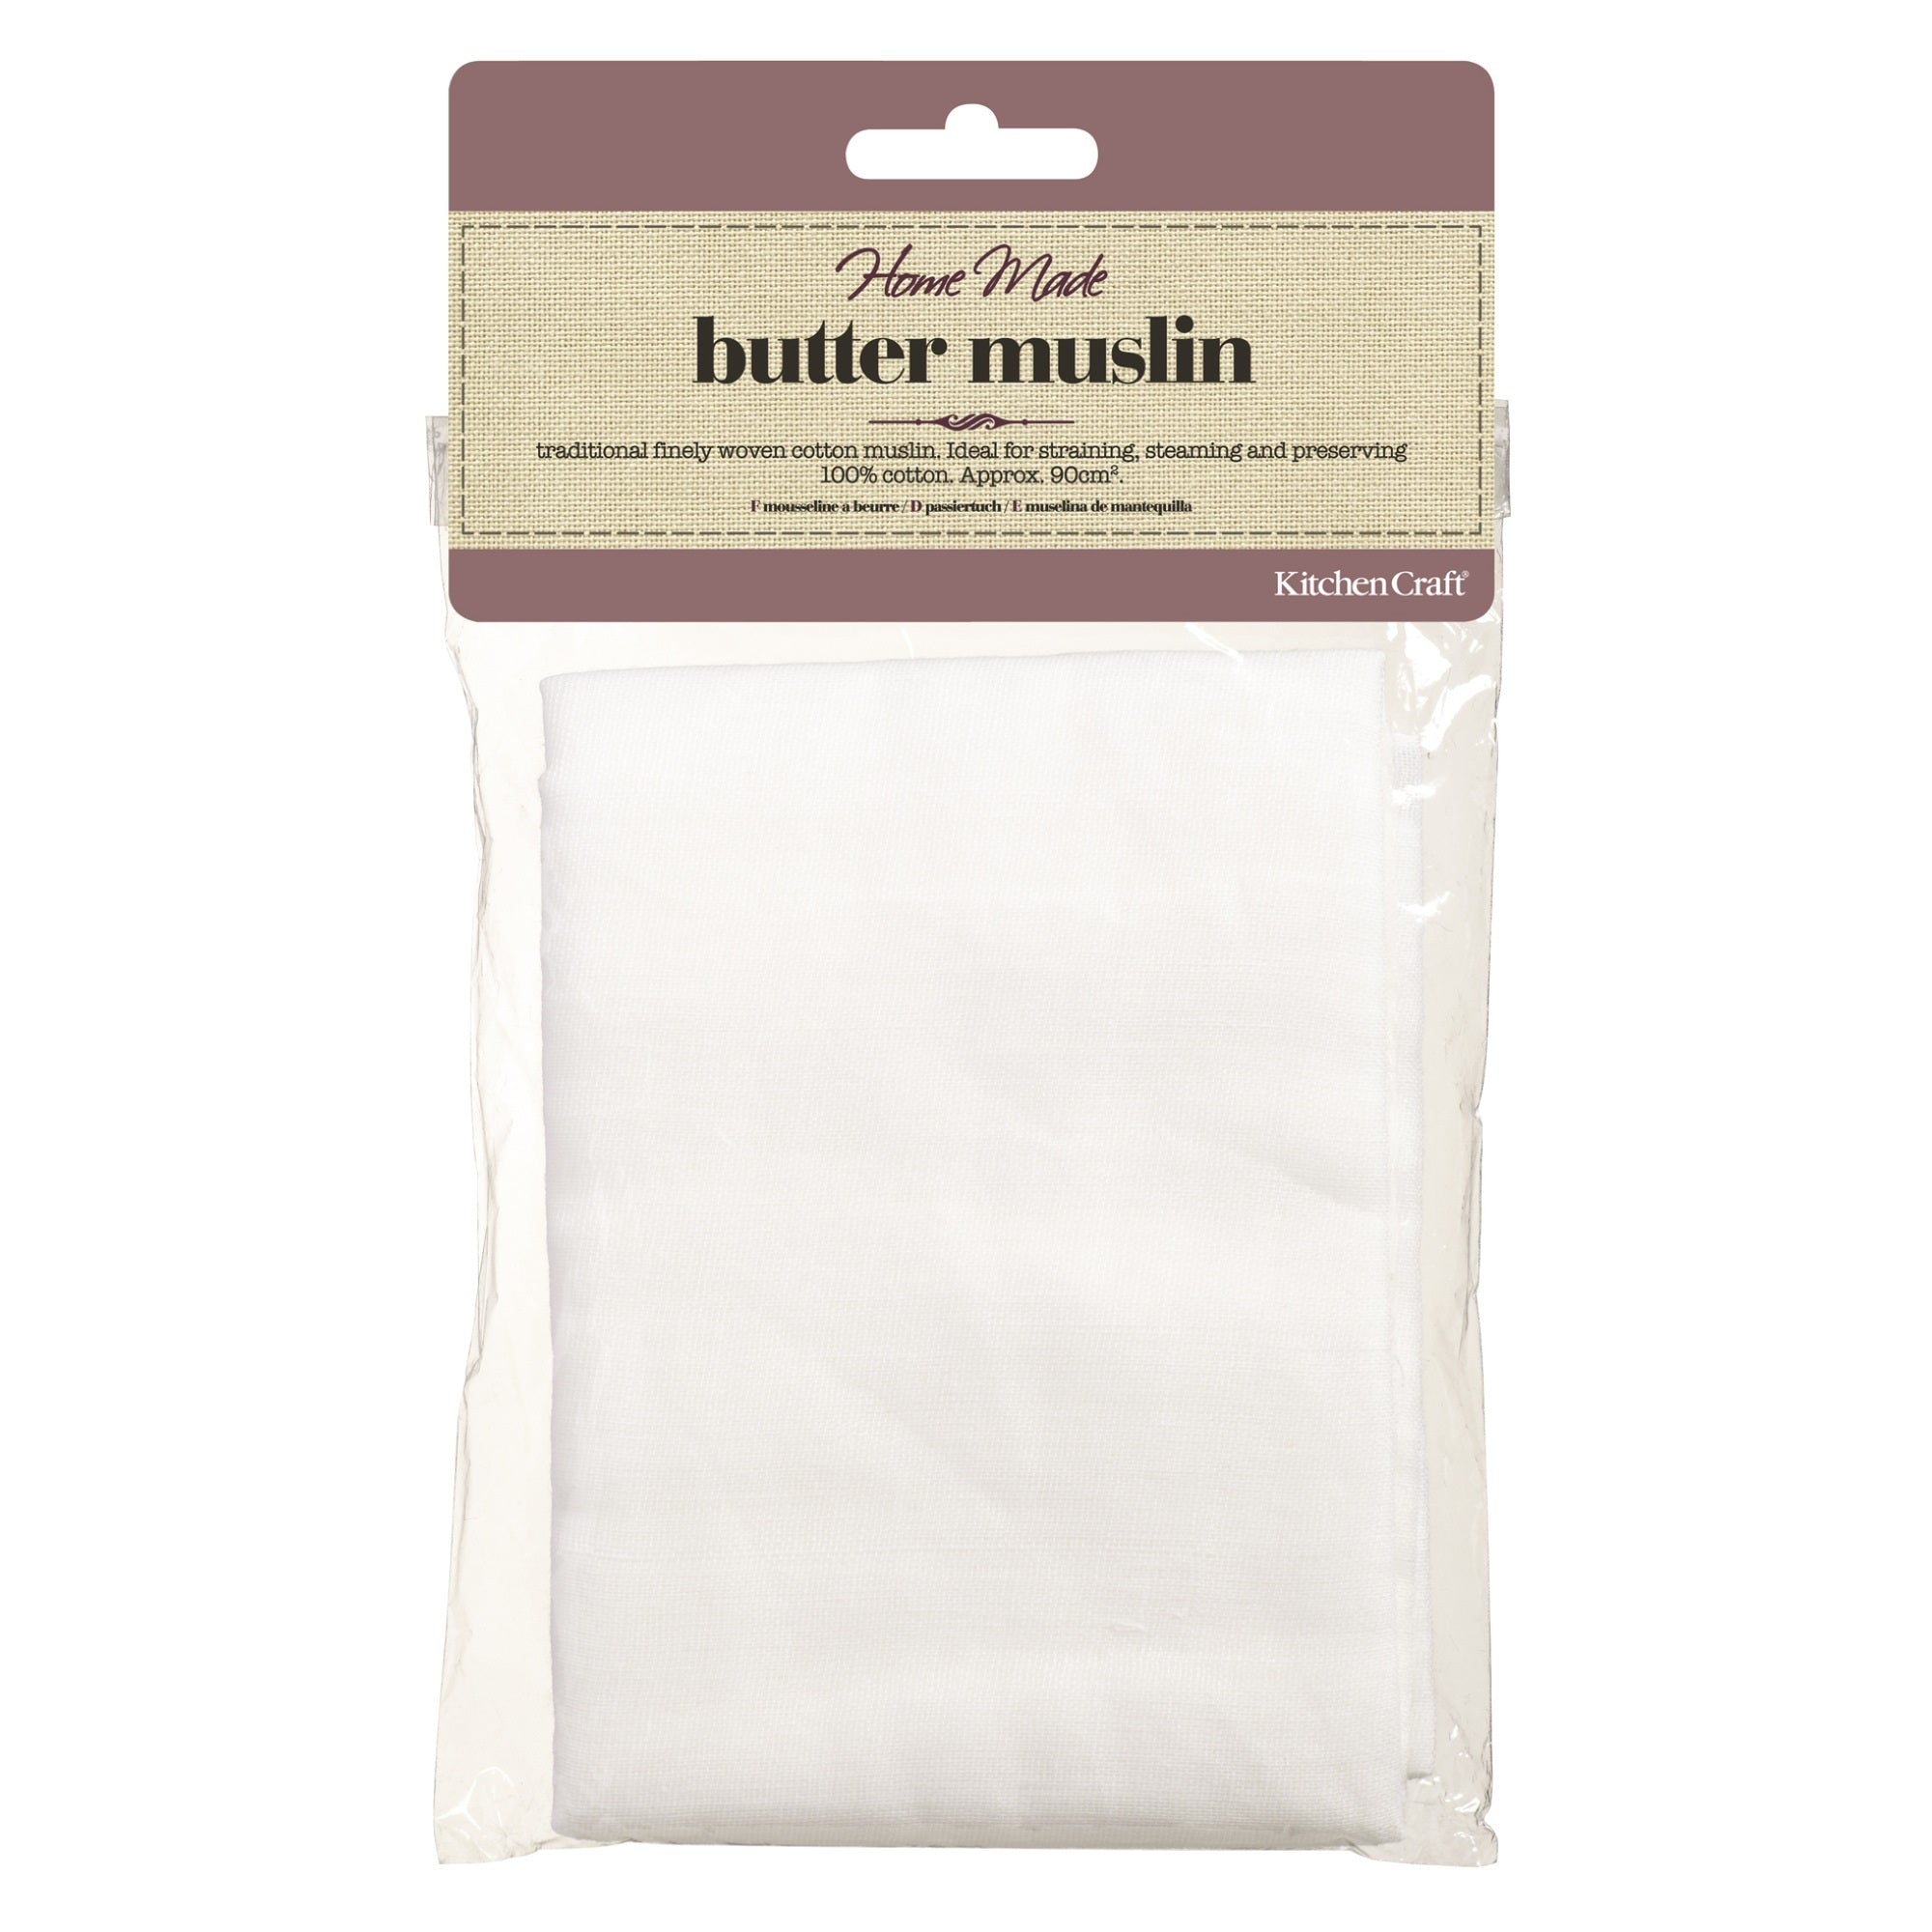 Home Made Butter Muslin - for Straining, Steaming and Preserving - The Cooks Cupboard Ltd